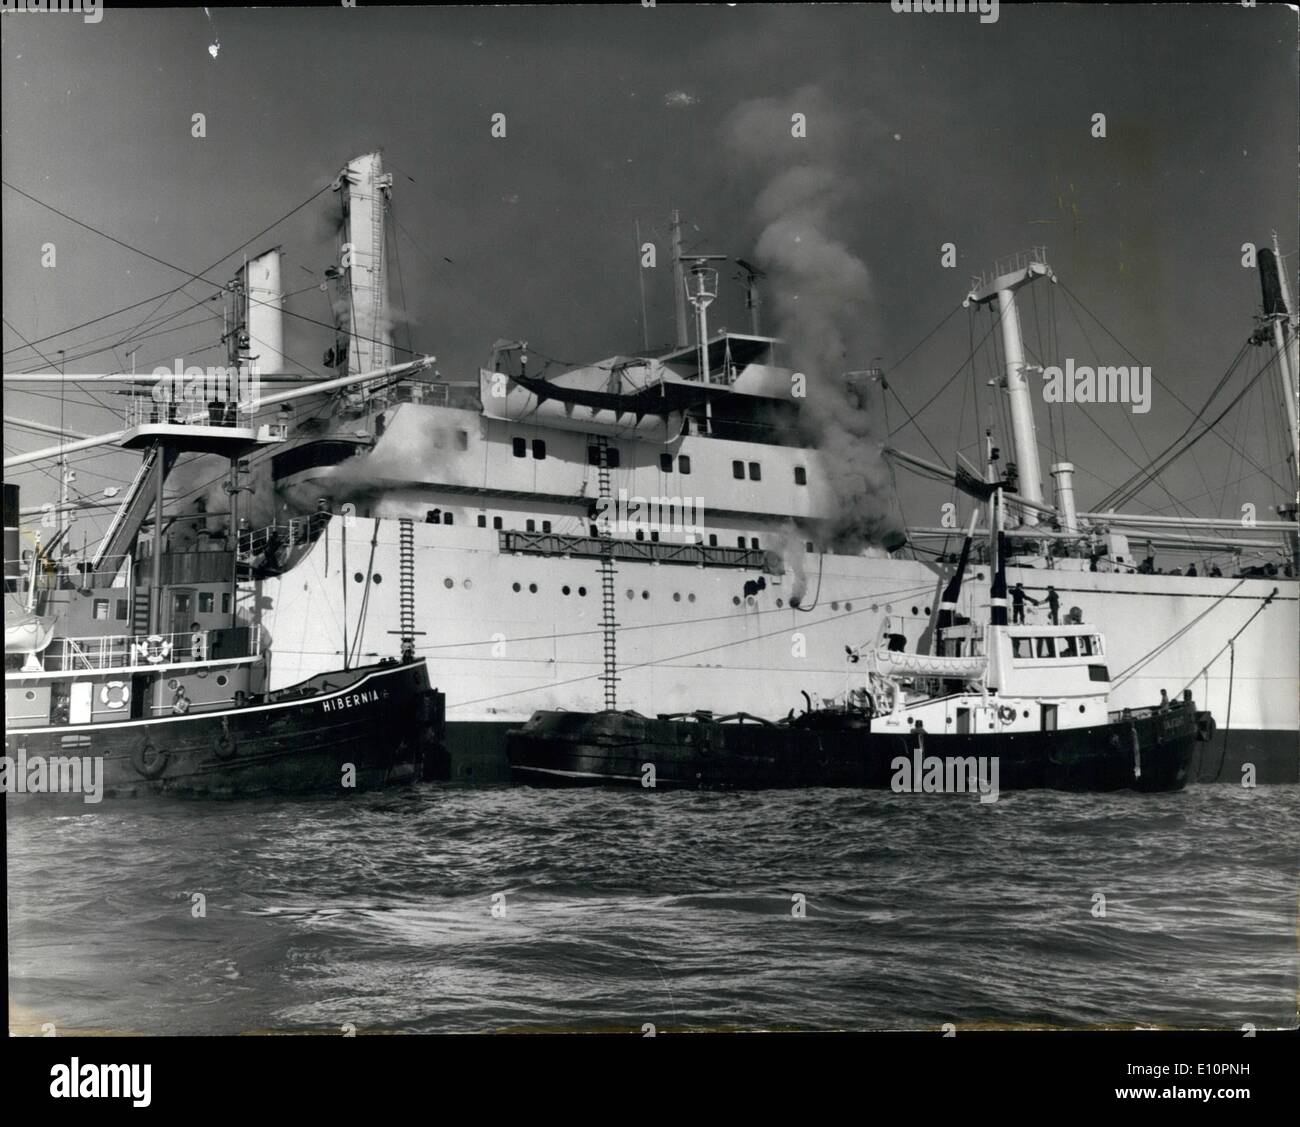 Nov. 11, 1973 - Six Dead In Fire-Swept Cargo Ship: Smoke pouring from the West German cargo ship, Cap San Antonio, off Dover yesterday after firemen, who landed on her deck by helicopter, had found the bodies of four crew members and two passengers in their cabins. Two of the injured crew were taken off by tugs and lifeboats, and the remainder stayed on board to help bring the fire under control. Stock Photo